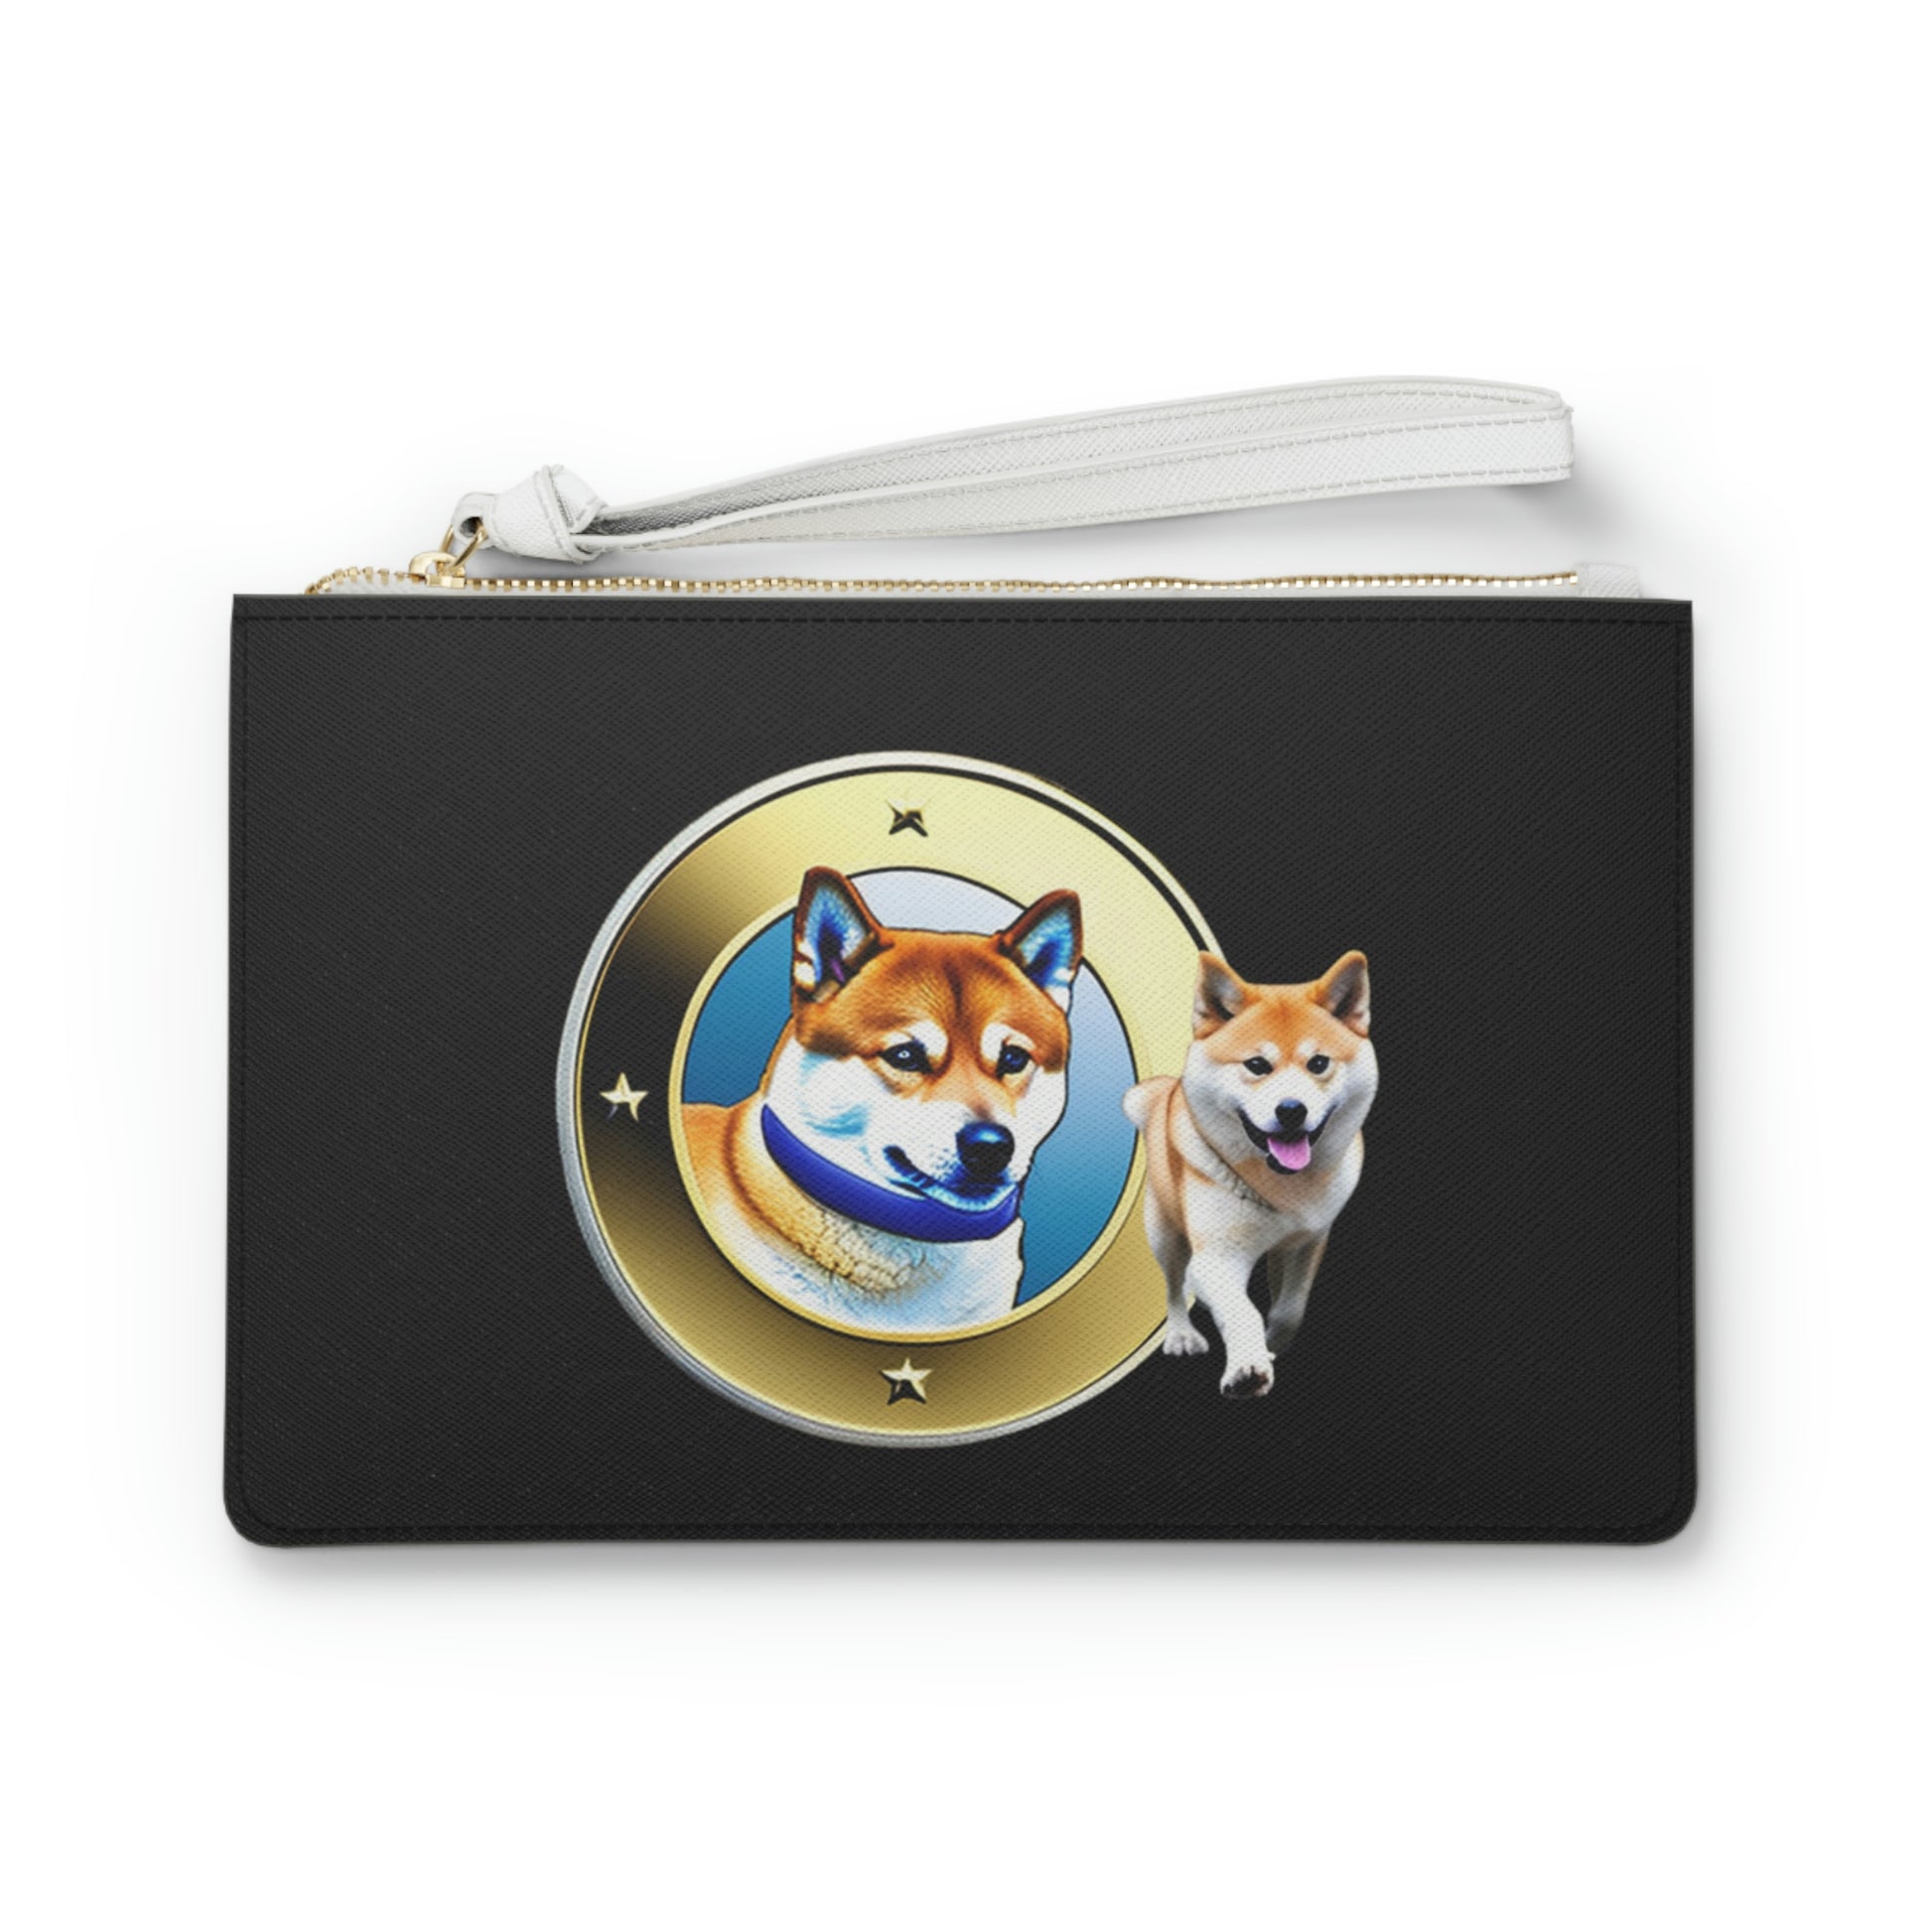 Shiba Inu Double Clutch Bag | BKLA | Shoes & Accessories | shoes, hats, phone covers, tote bags, clutch bags